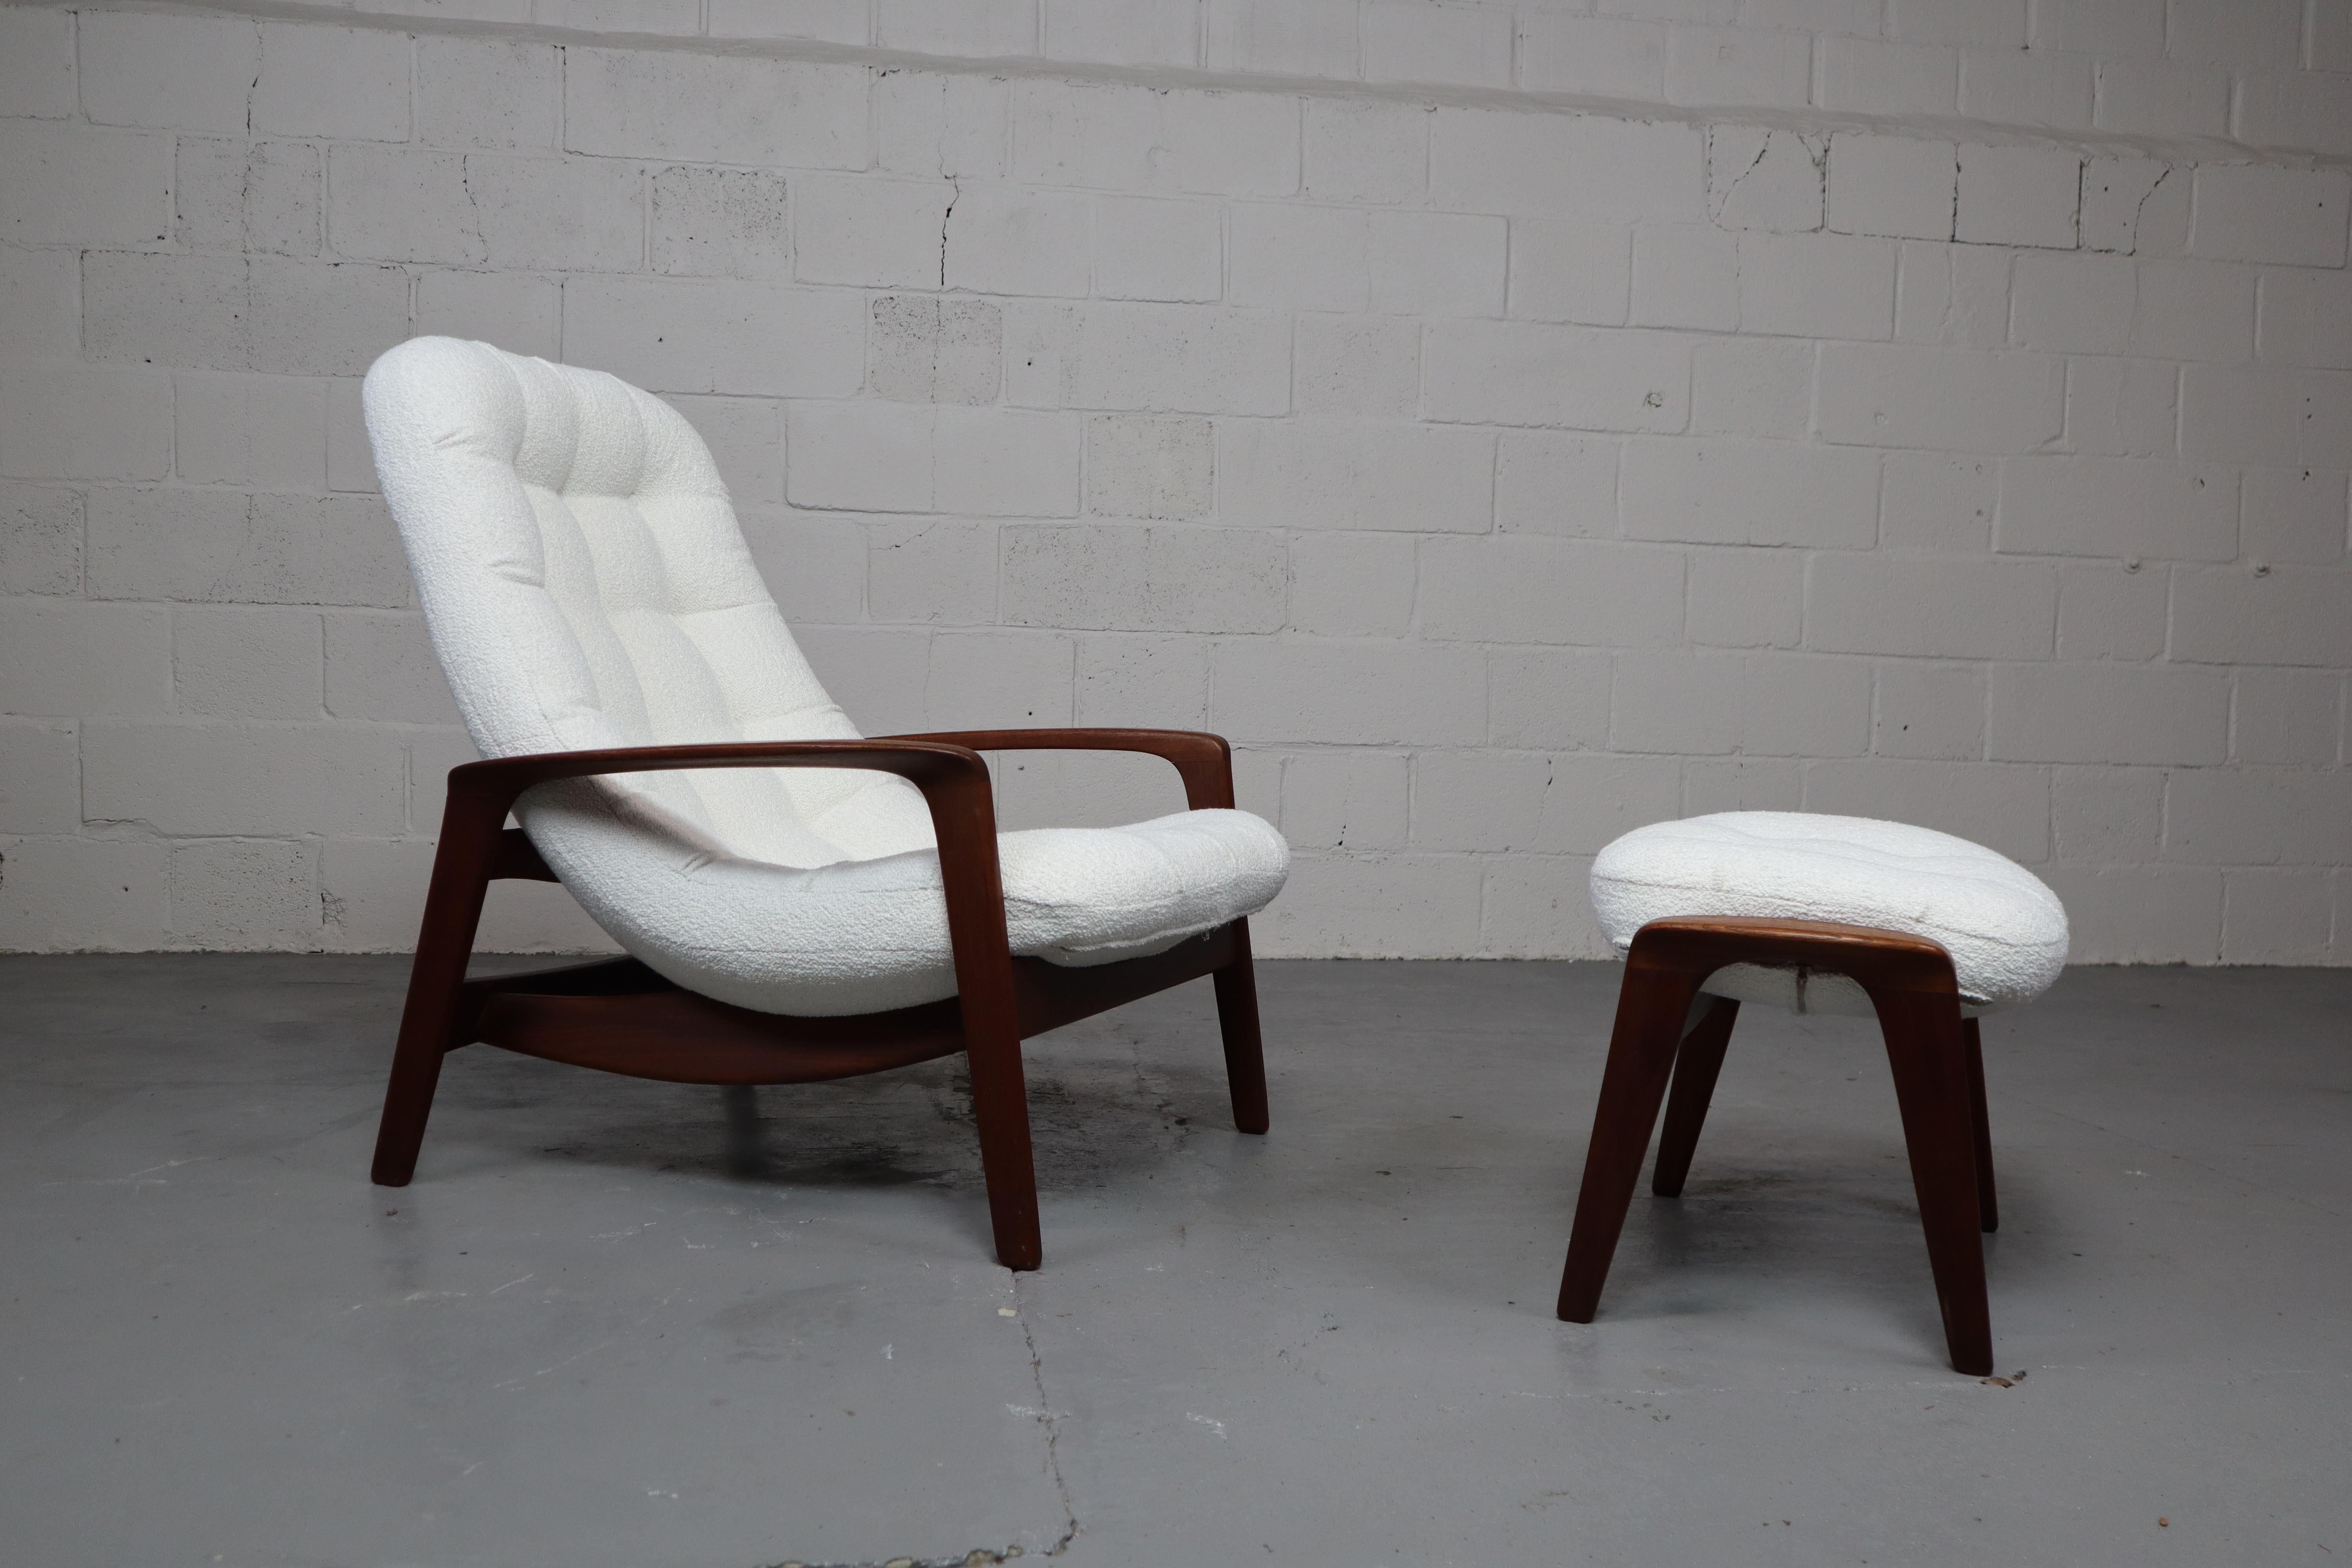 Vintage teak lounge chair with ottoman known as 